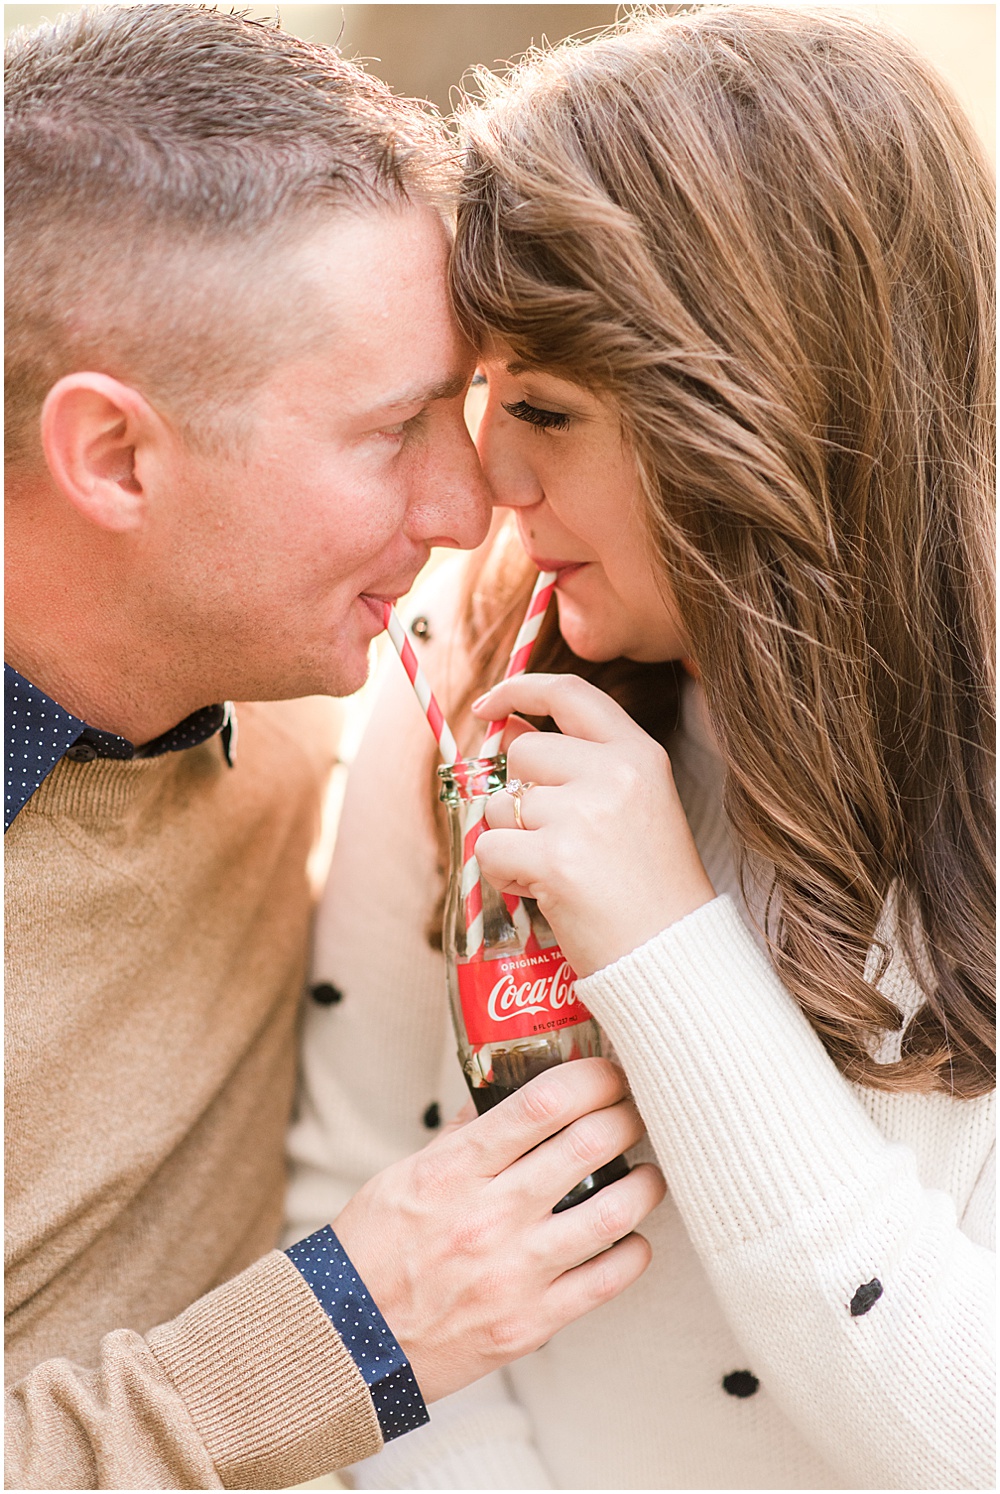 old louisville st. james court engagement session